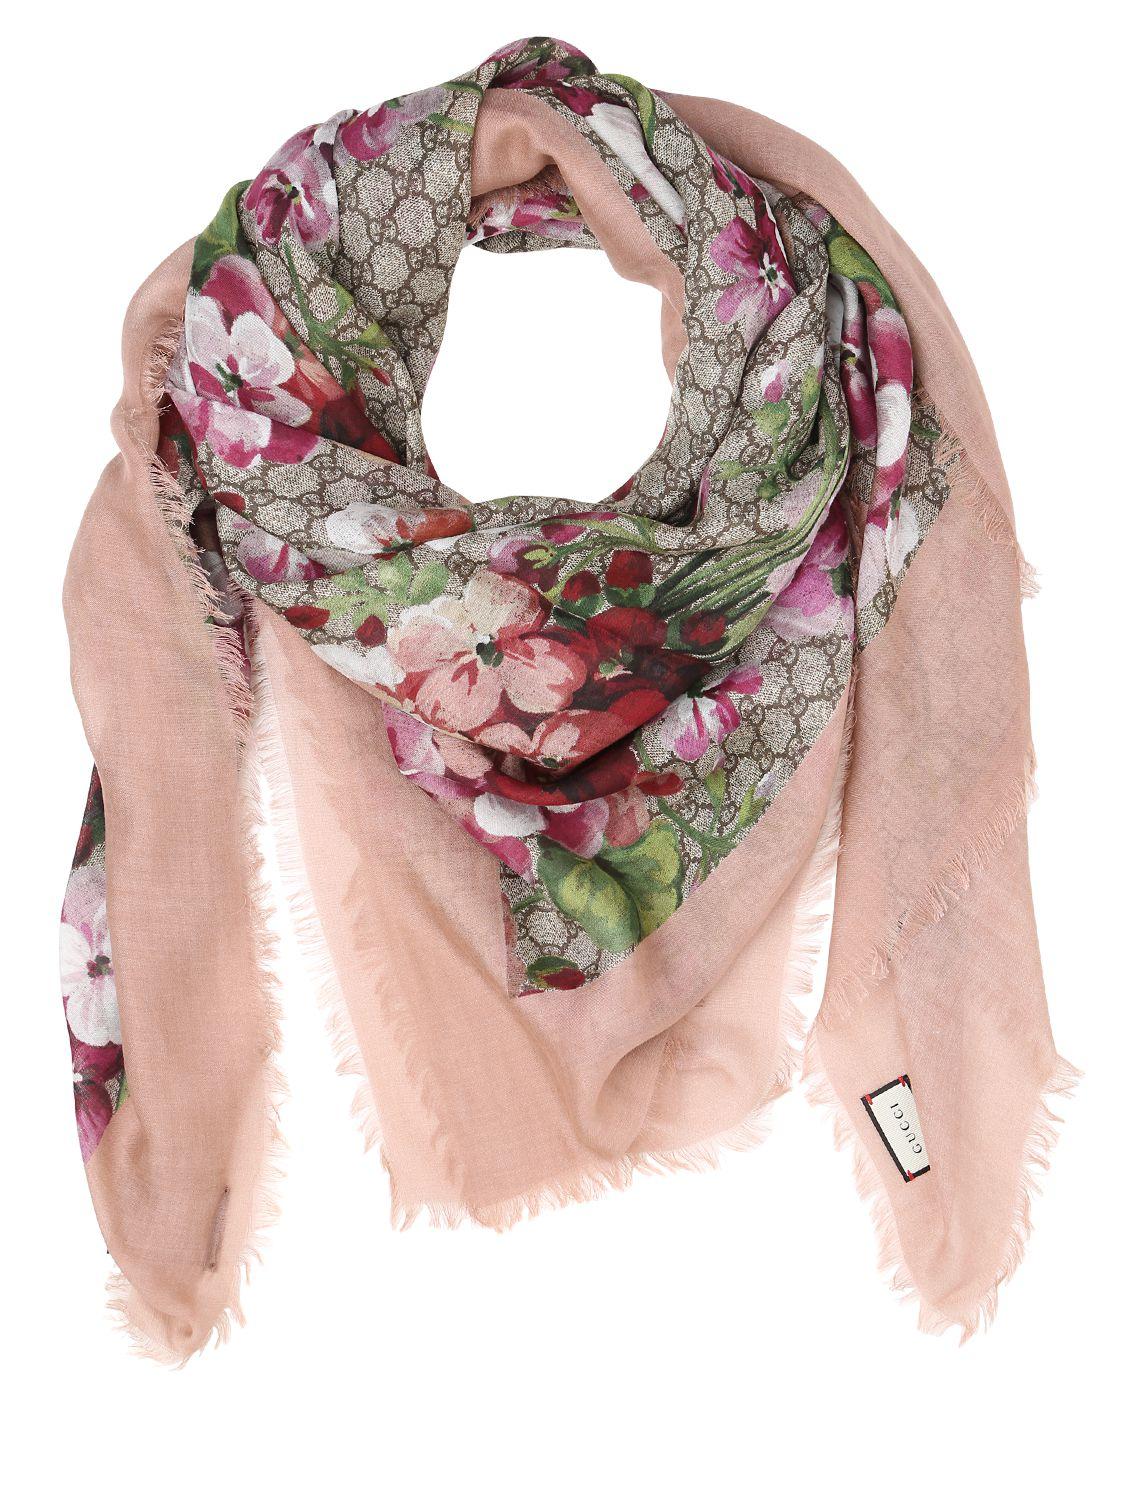 Gucci Blooms Print Gg Supreme Scarf in Pink | Lyst